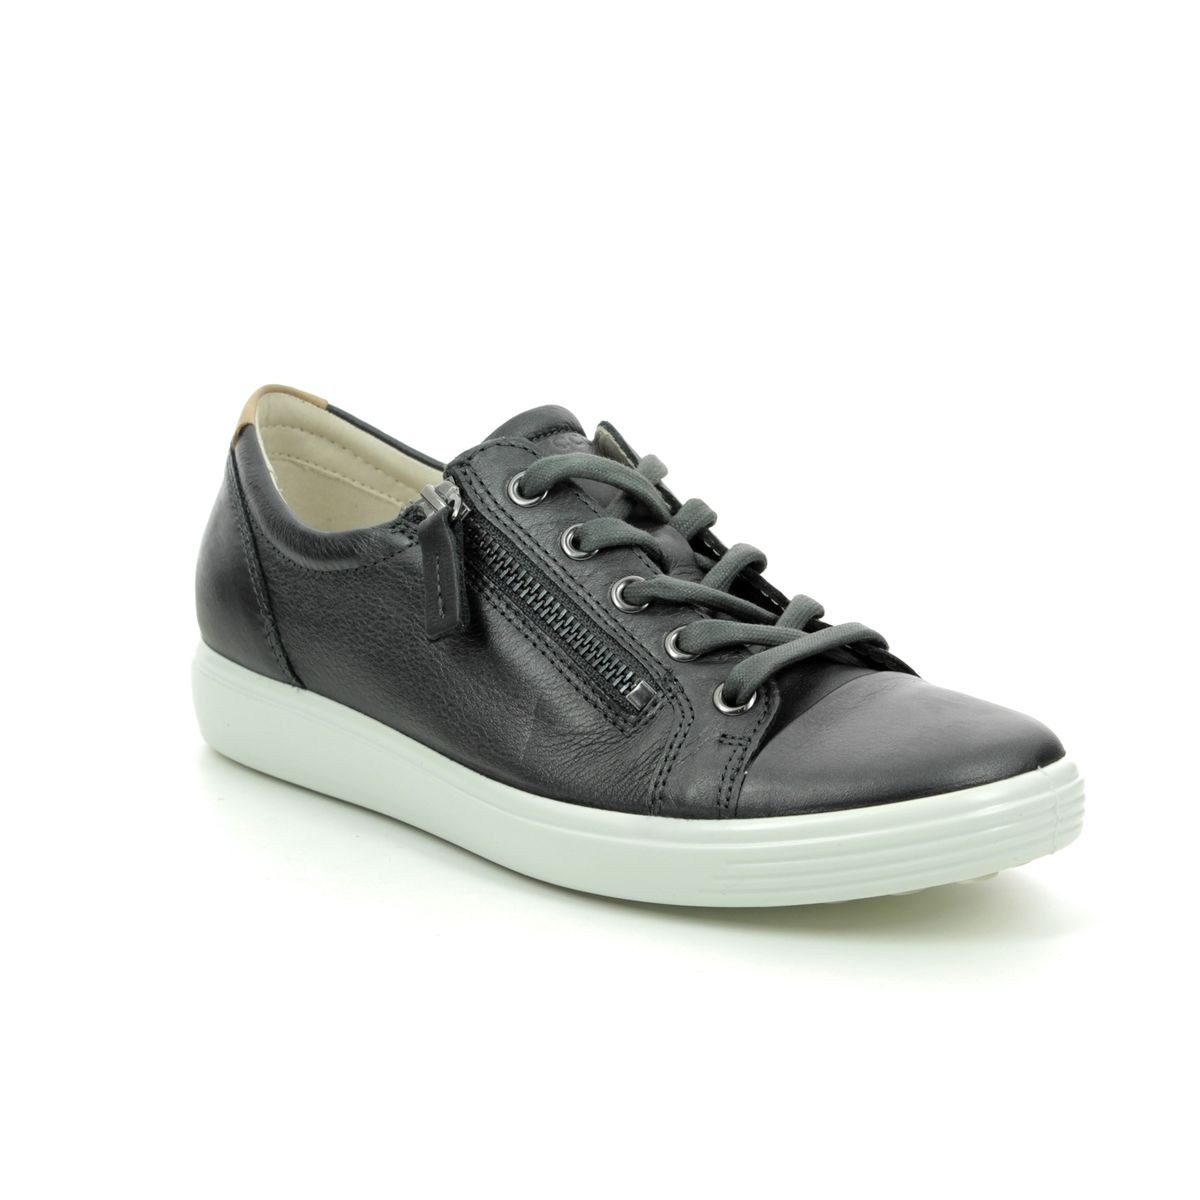 Ecco Soft 7 Lace Zip Dark Grey Leather Womens Lacing Shoes 430853-51383 In Size 39 In Plain Dark Grey Leather